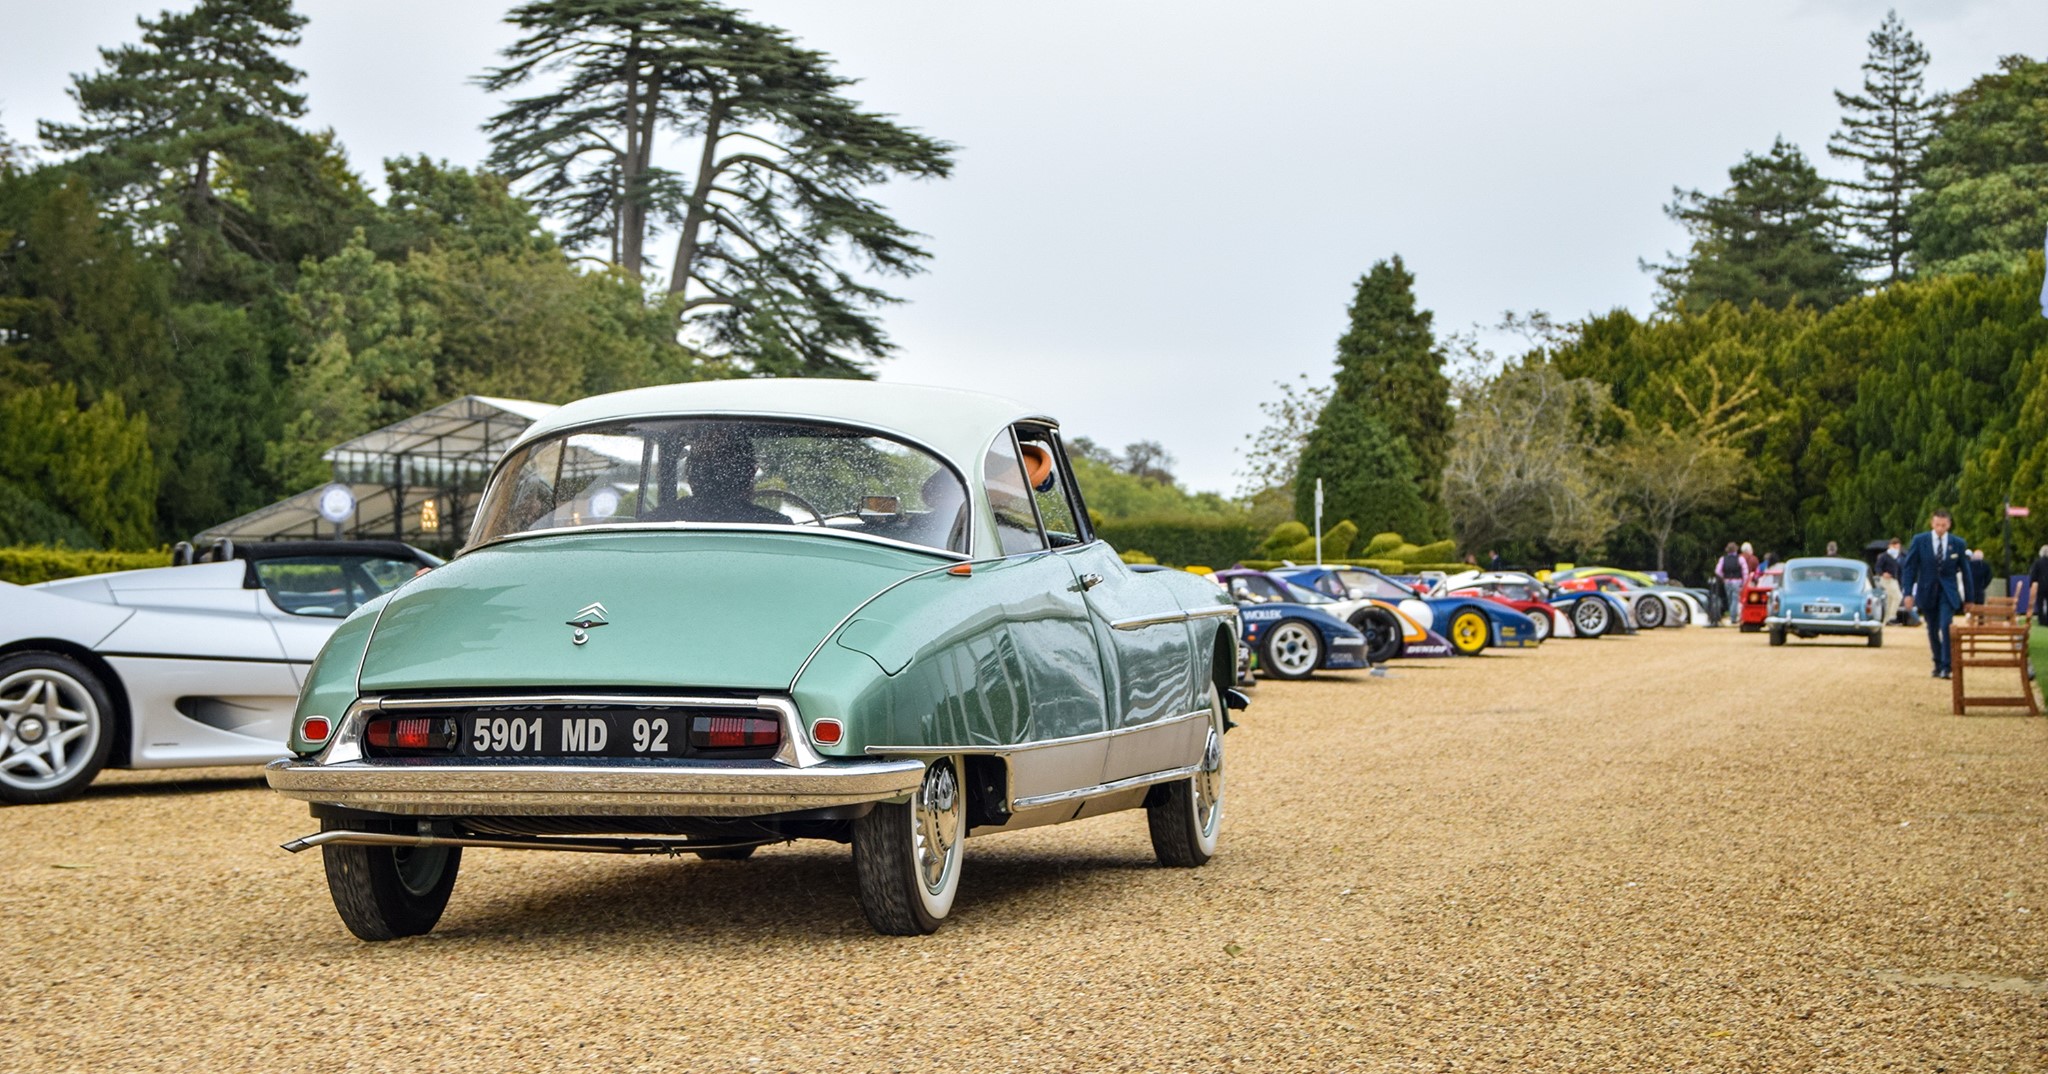 london_2020 Concours of Elegance 2020